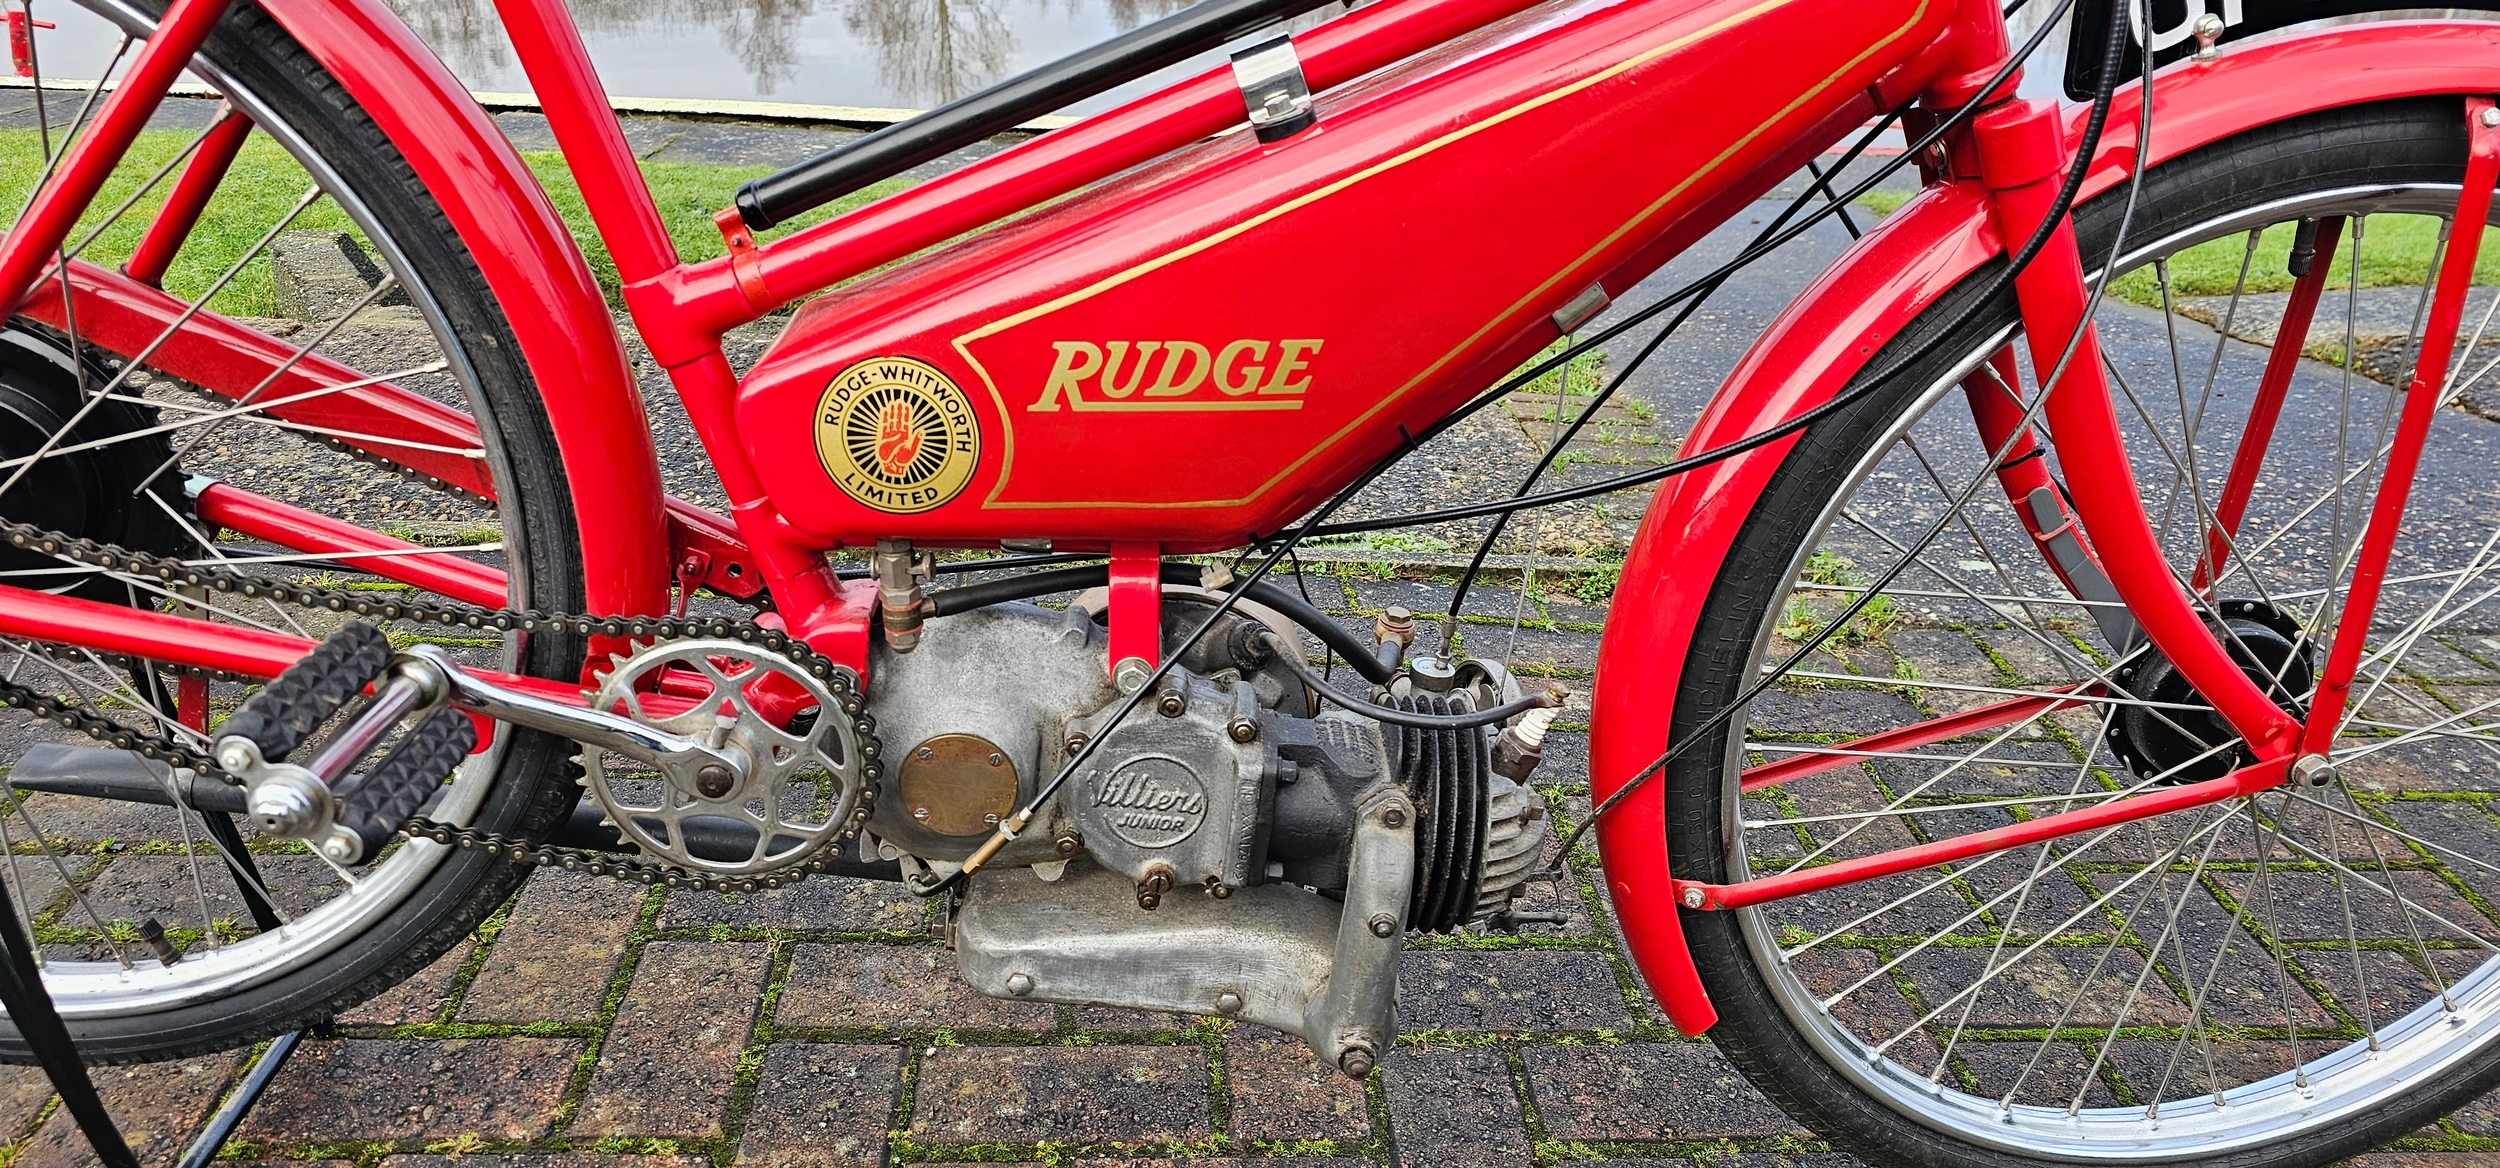 1940 Rudge Autocycle, 98cc. Registration number OFO 180 (non transferrable). Frame number 3031. - Image 10 of 13